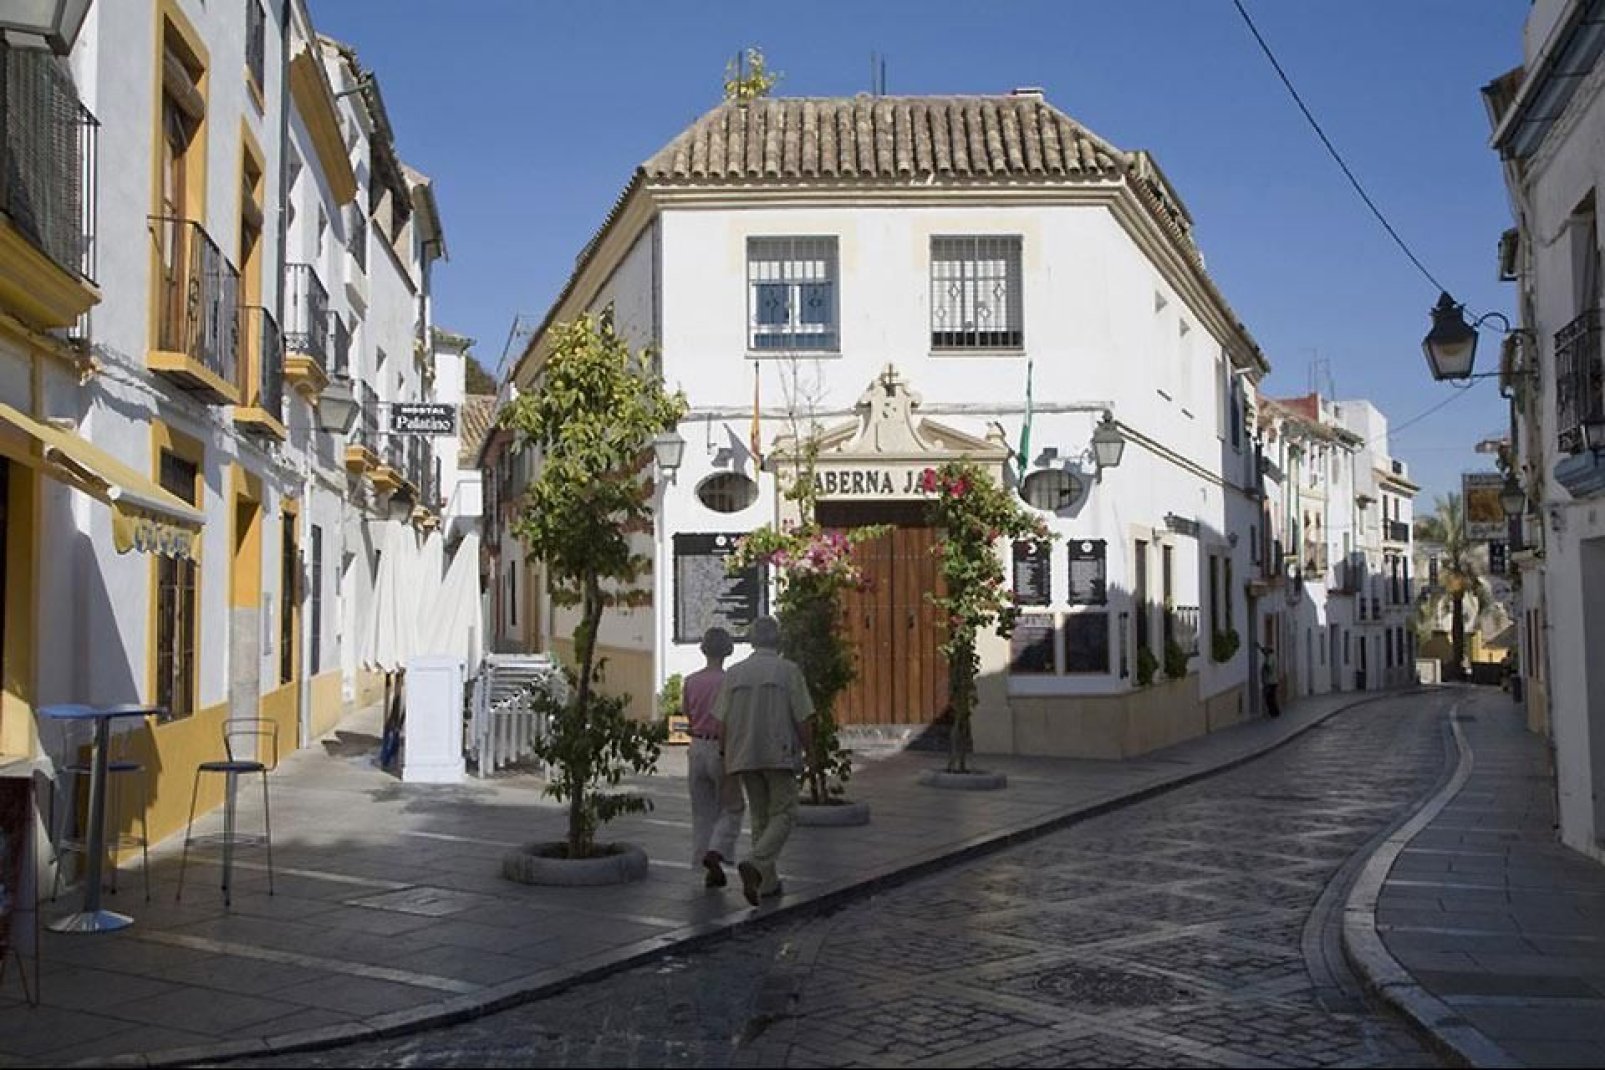 Córdoba has many pleasant streets lined with white and yellow houses.